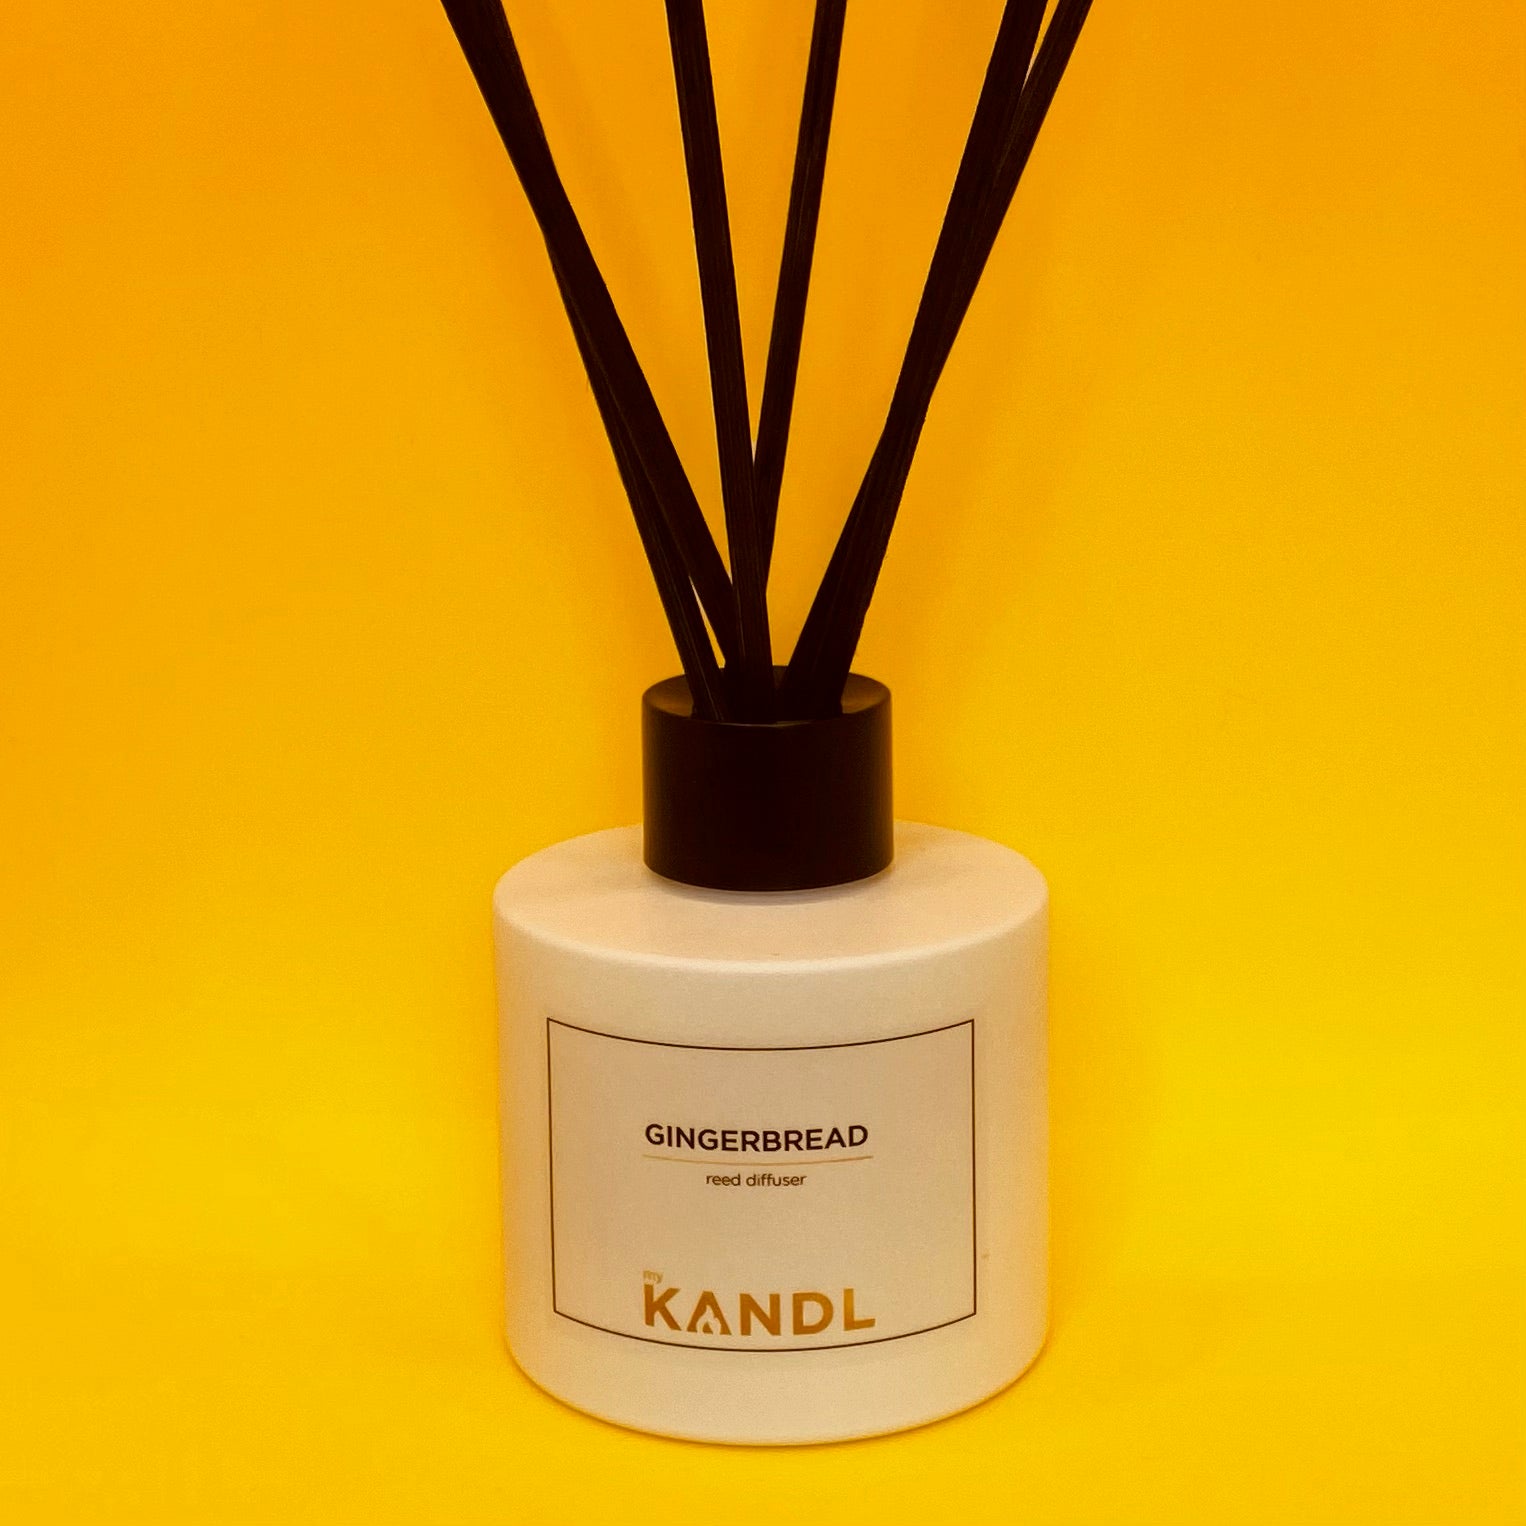 GINGERBREAD REED DIFFUSER 100ml